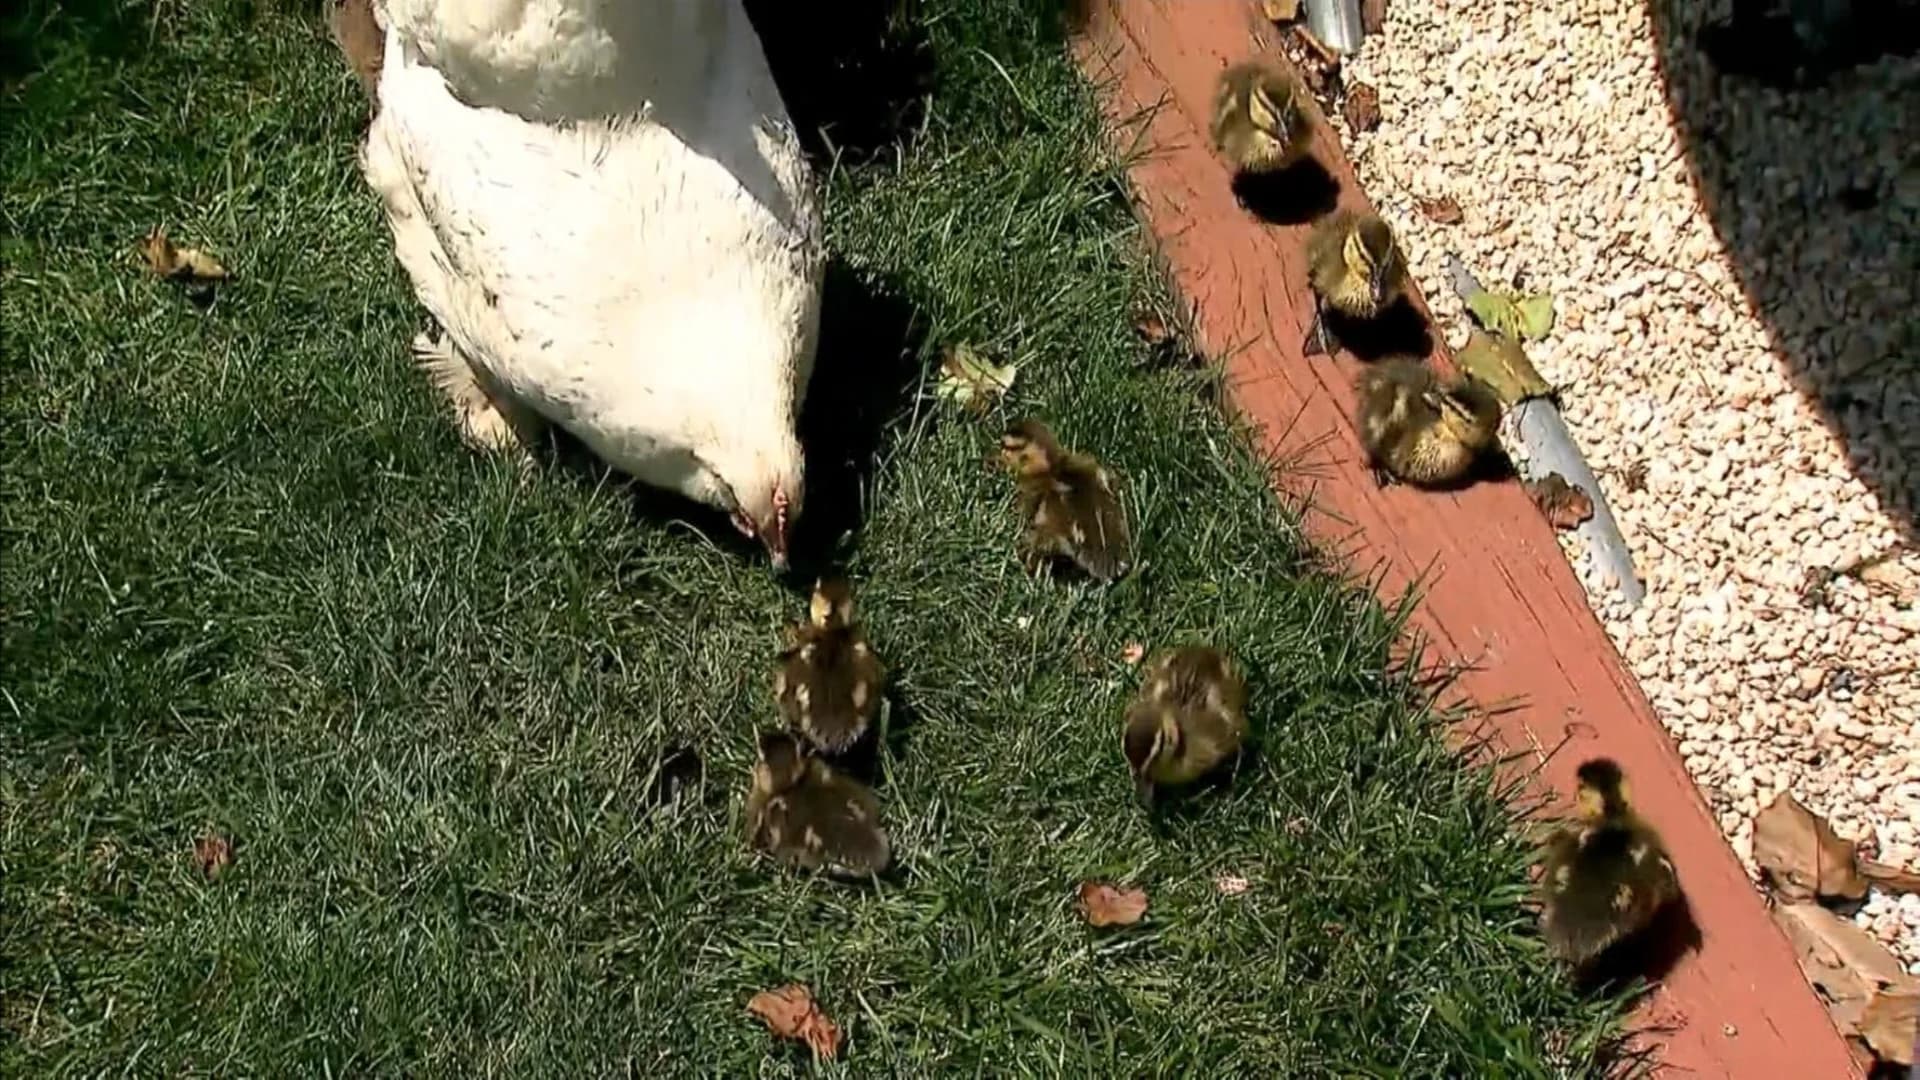 Mother hen raises ducklings as her own in Brick Township